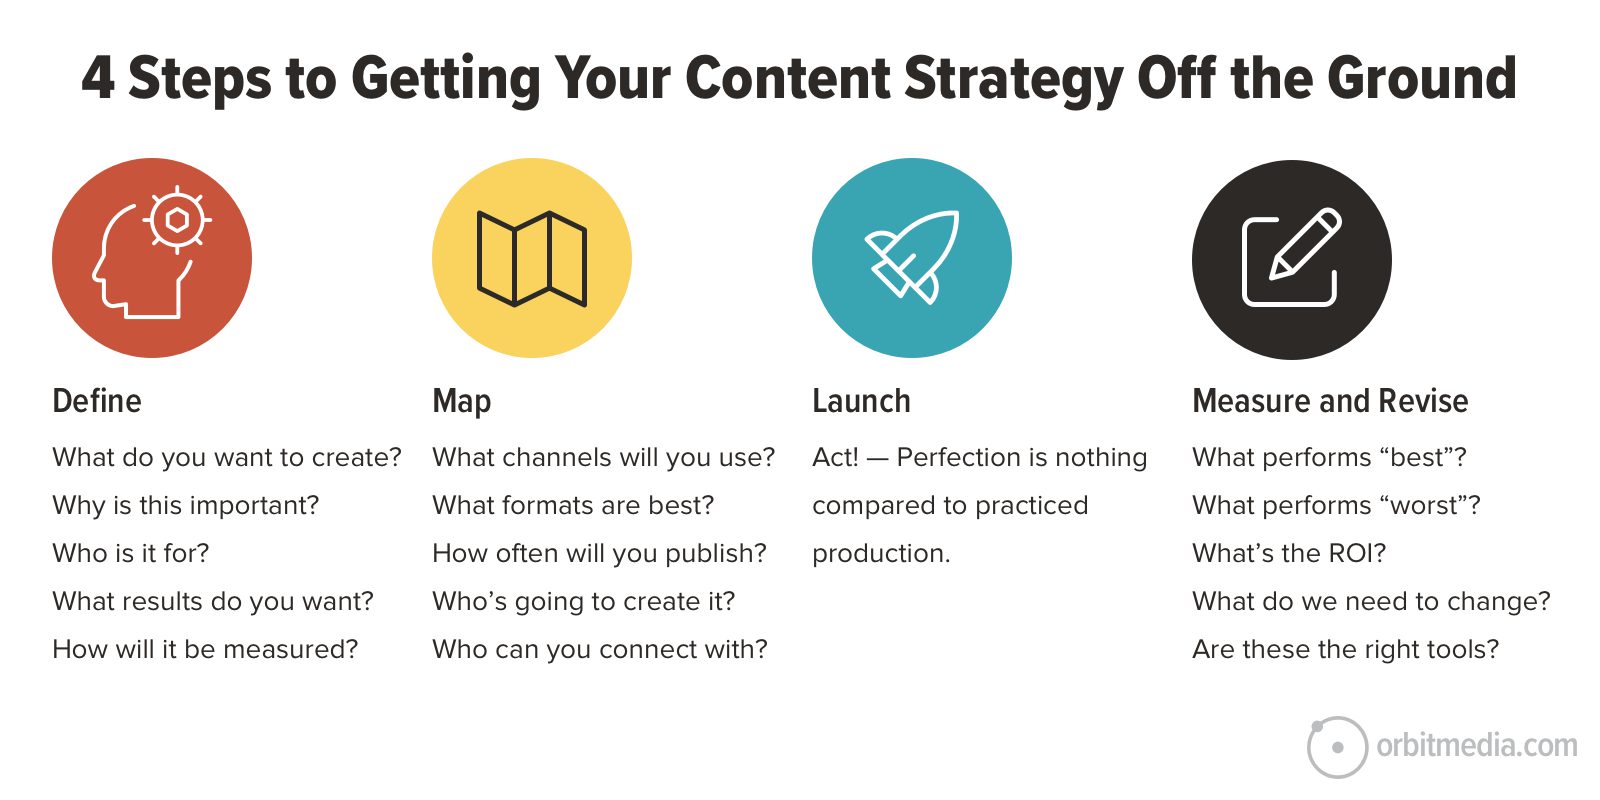 4 steps to starting a content strategy; define, map, launch, measure